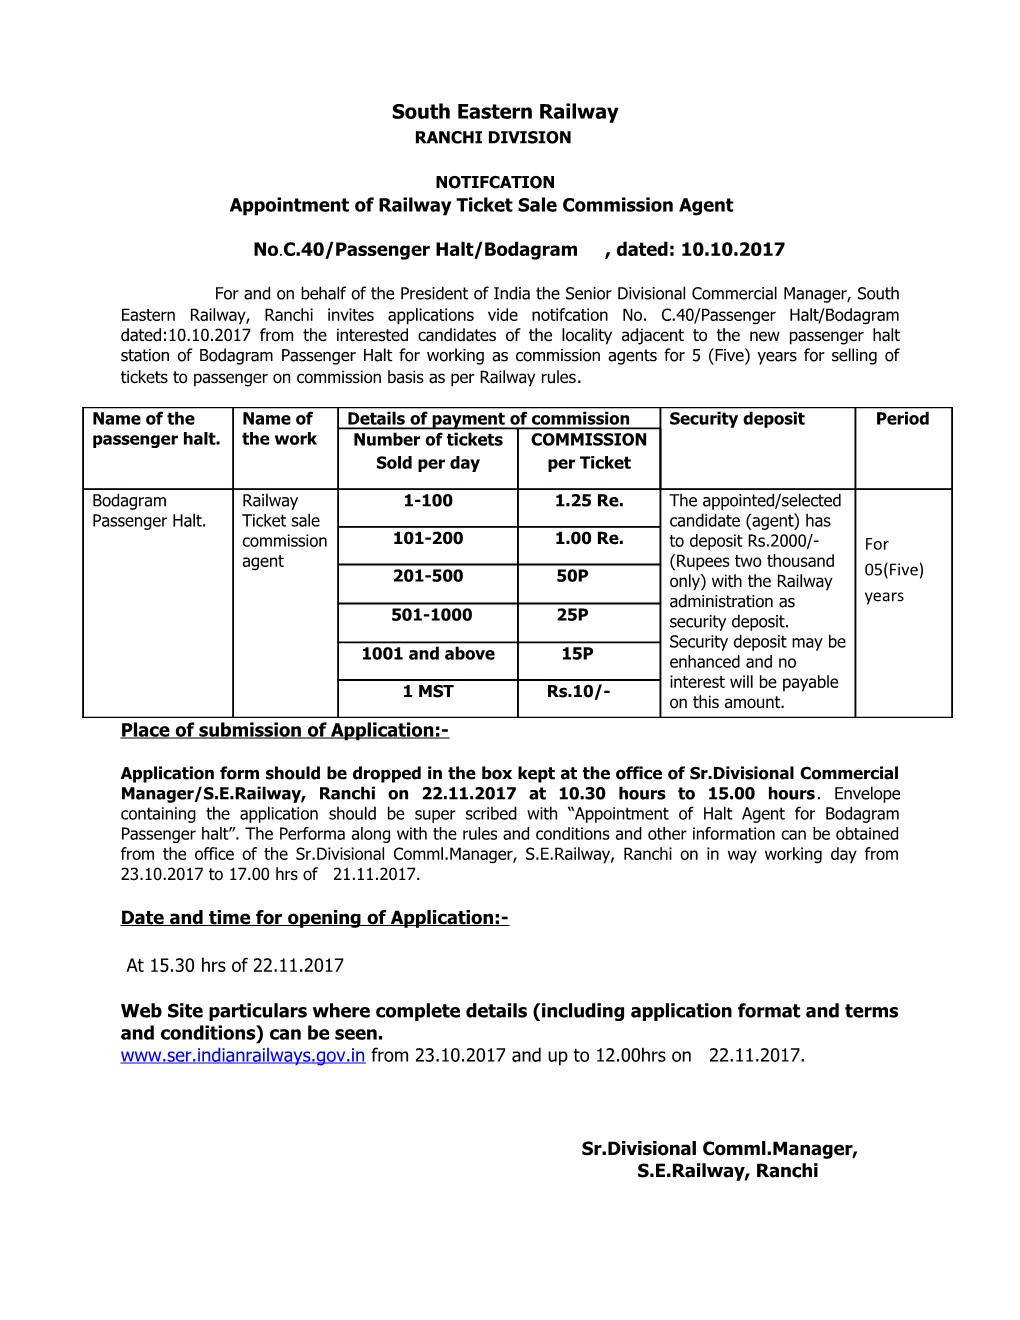 Appointment of Railway Ticket Sale Commission Agent